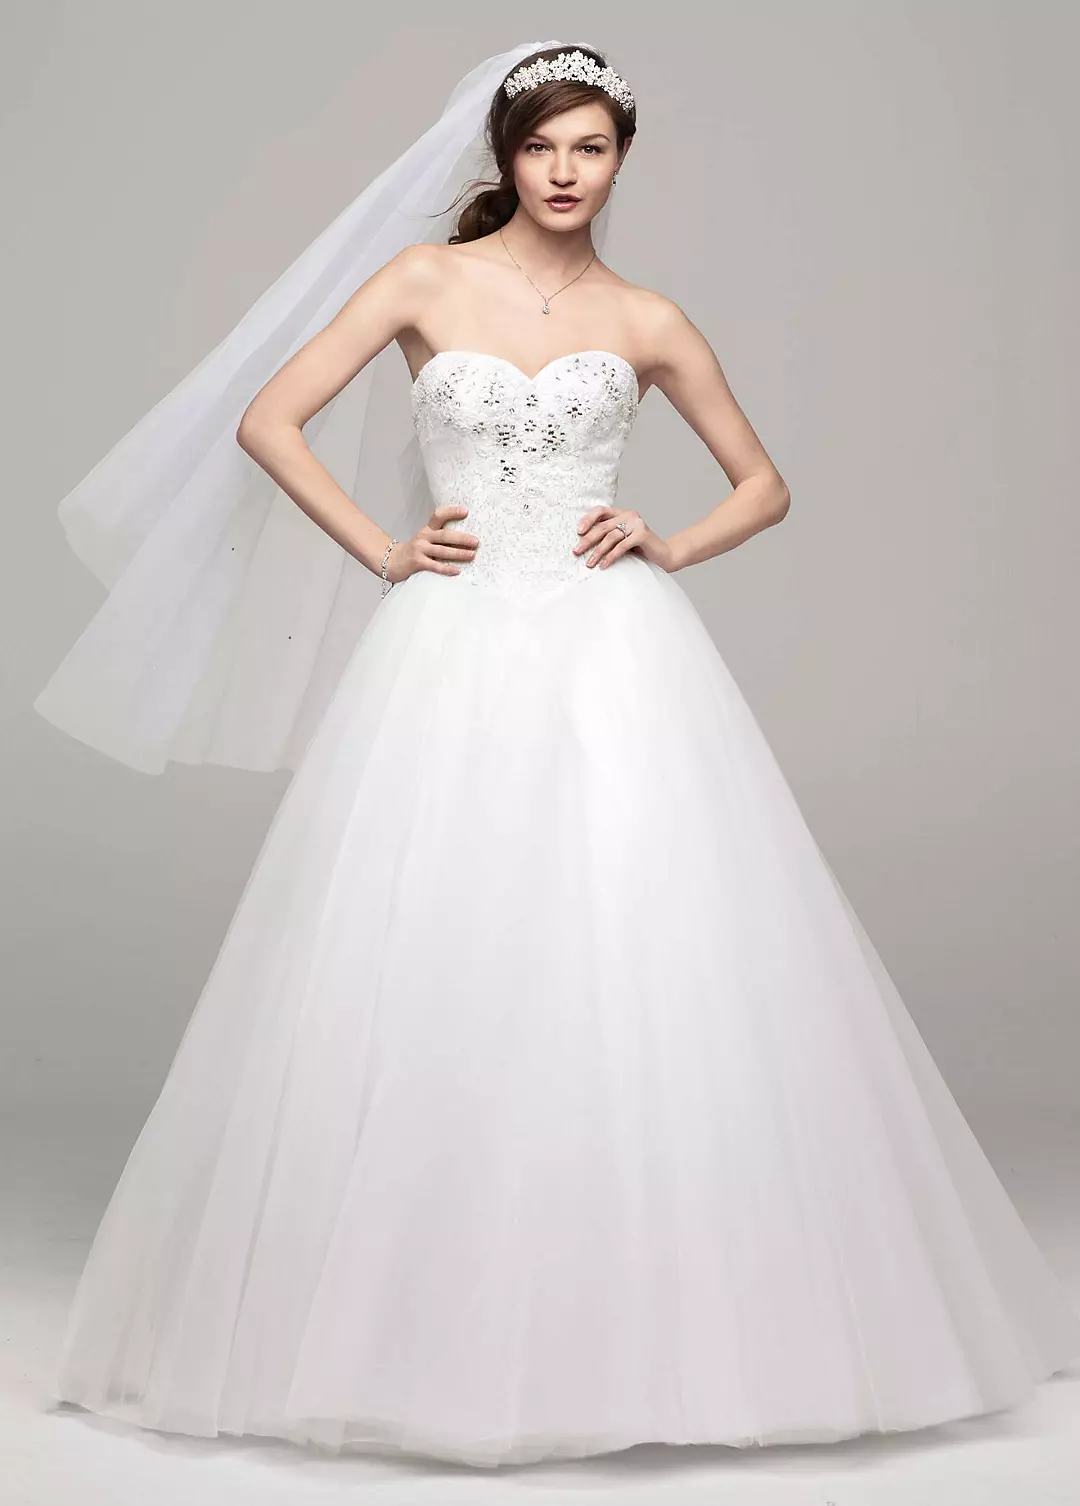 Strapless Tulle Ball Gown with Beaded Bodice Image